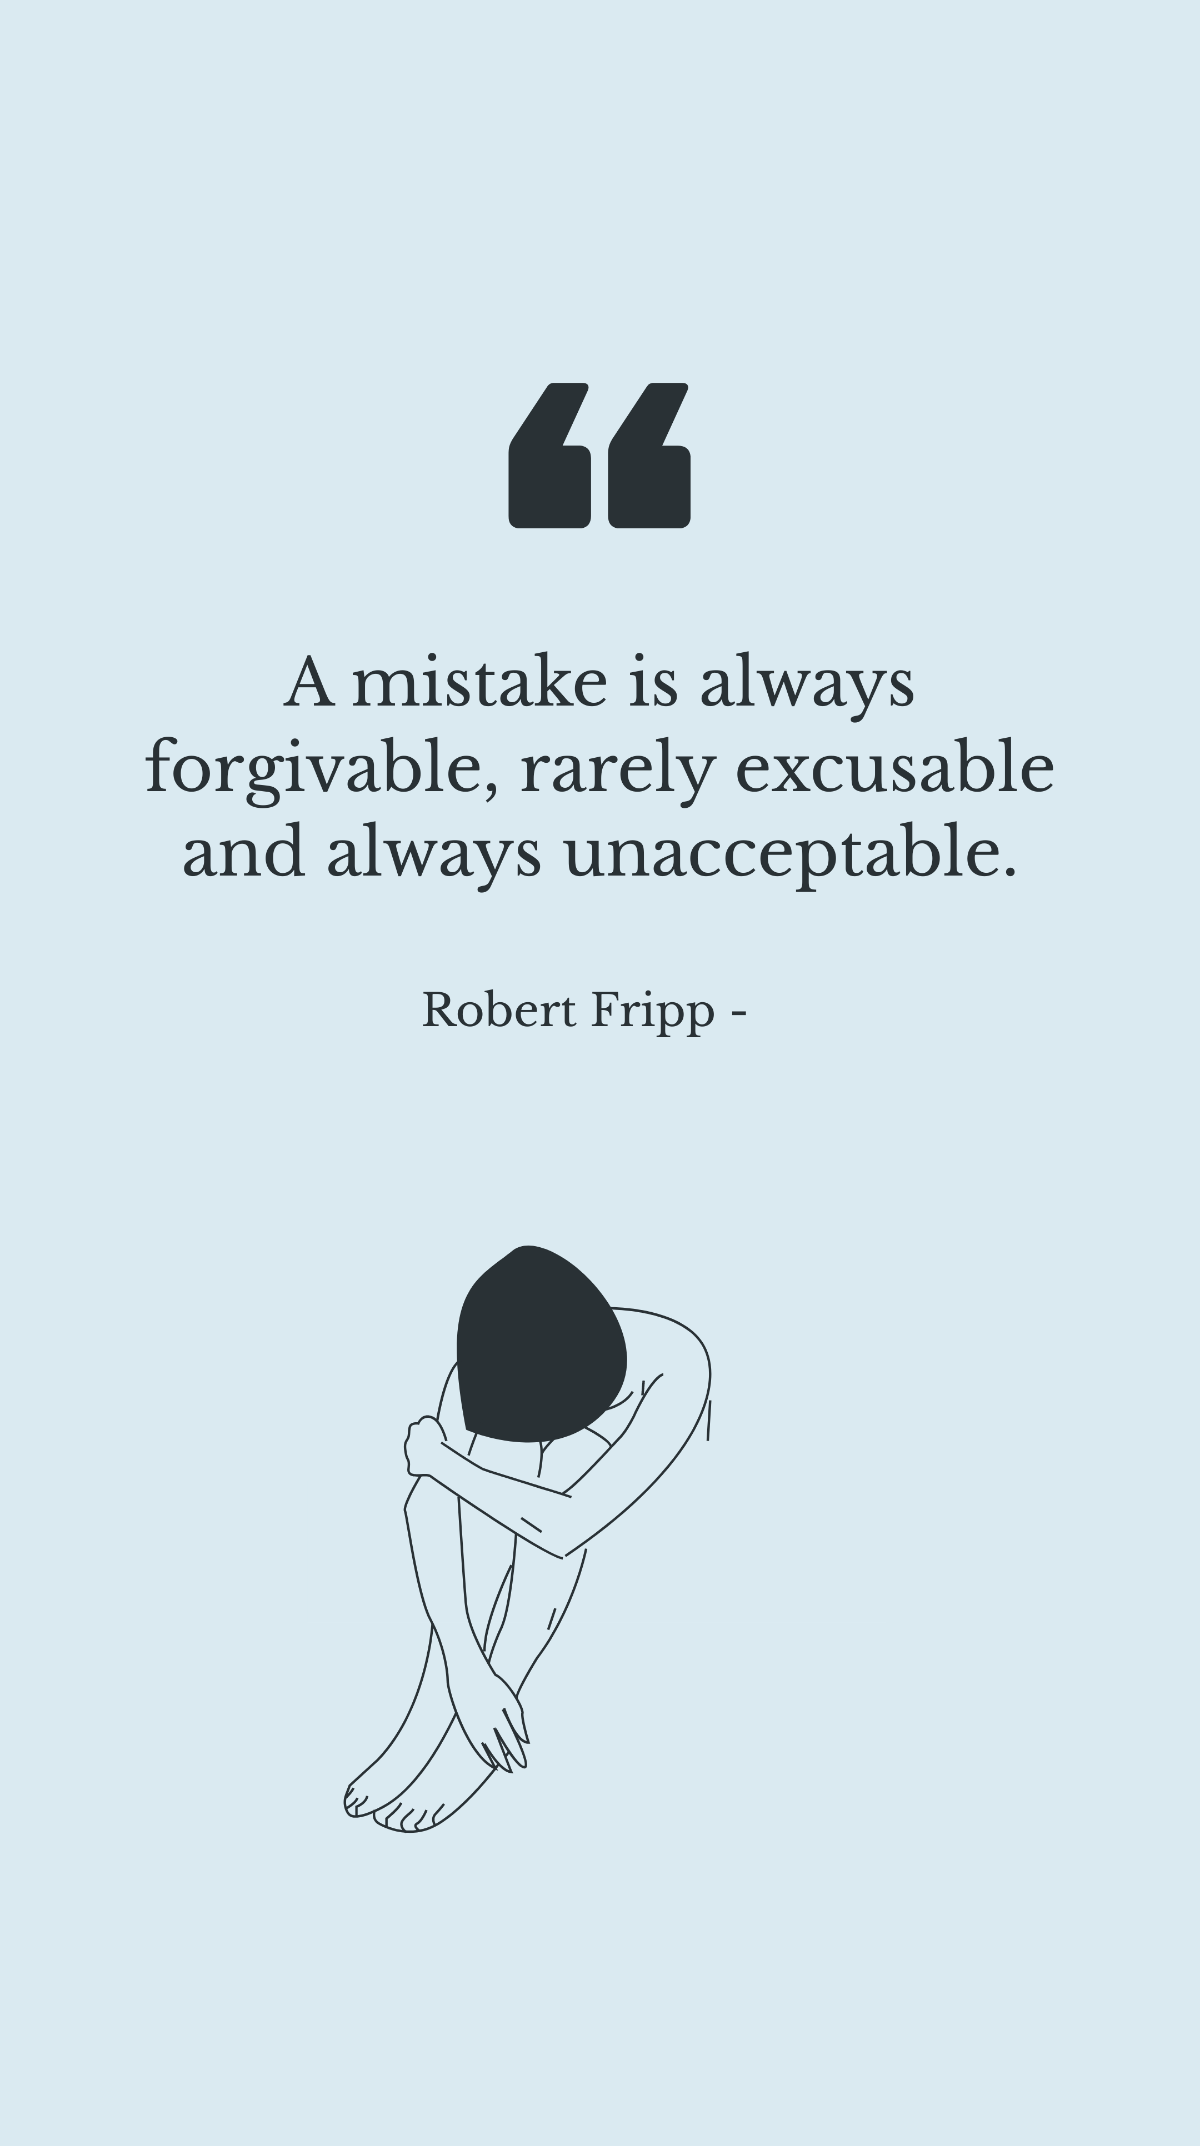 Robert Fripp - A mistake is always forgivable, rarely excusable and always unacceptable.